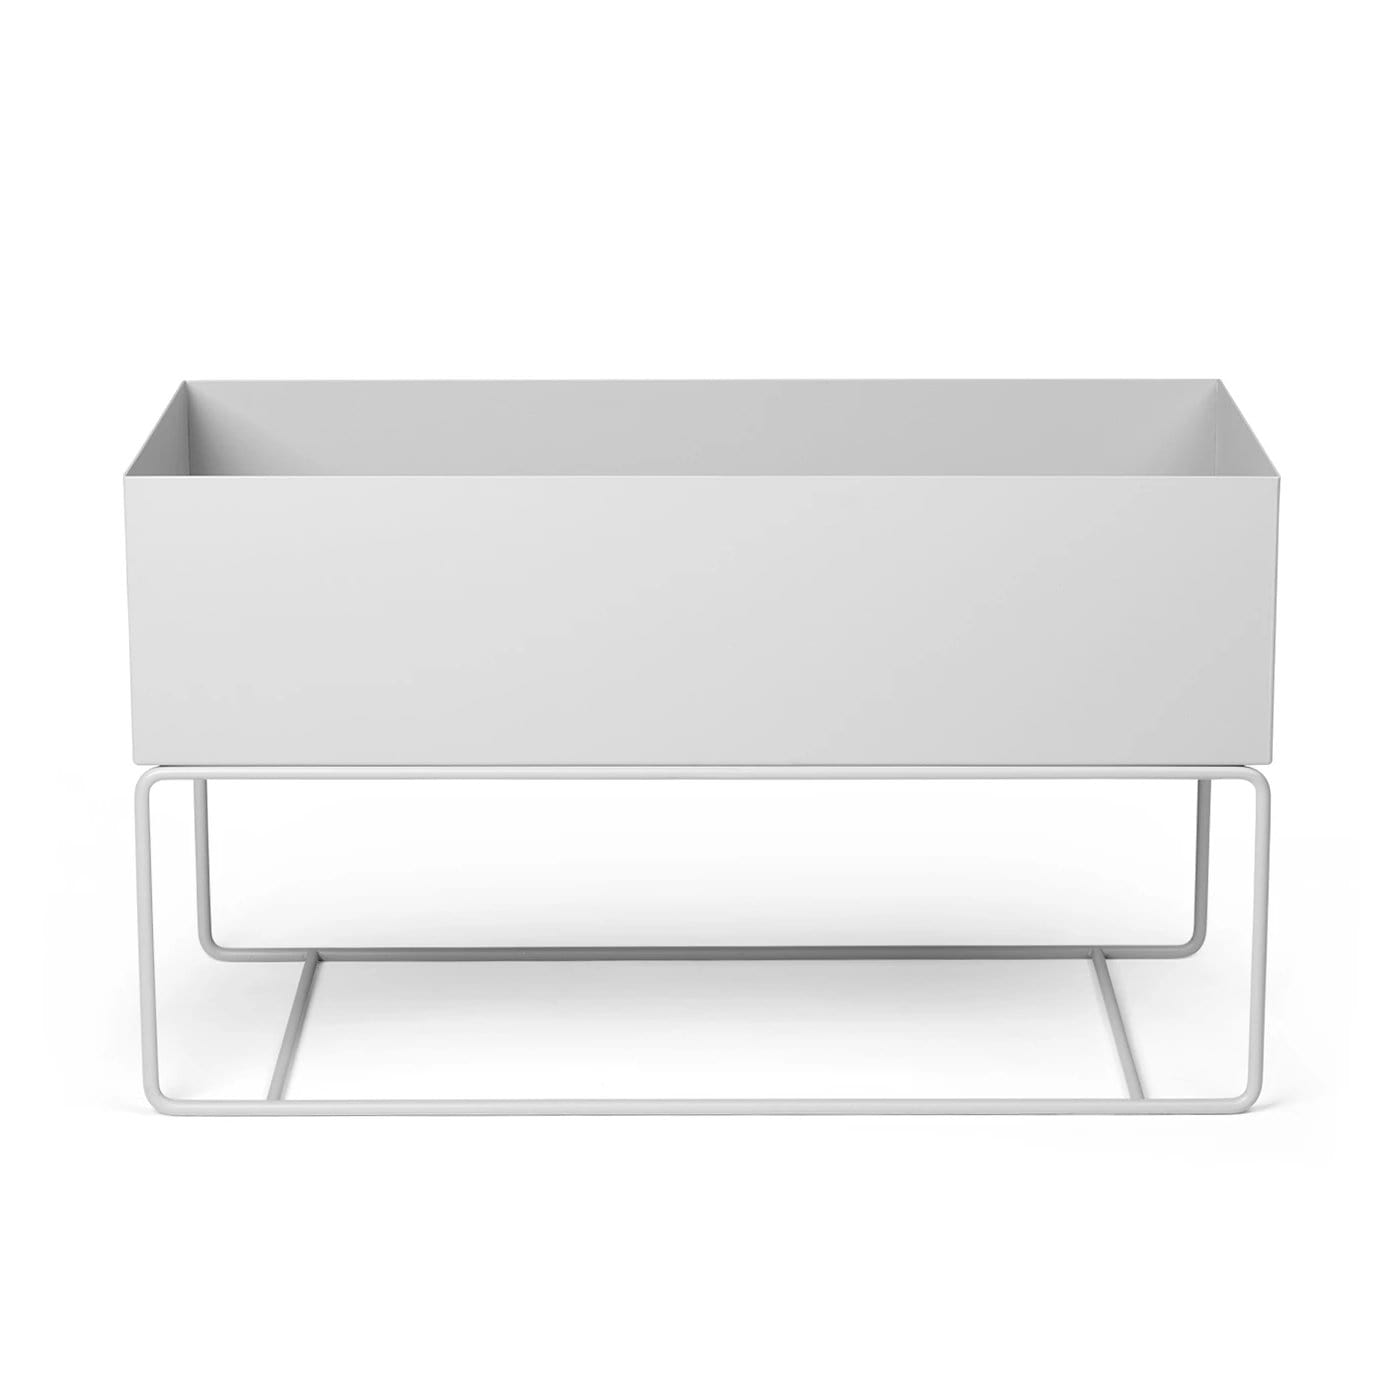 Ferm Living Plant Box Large. Available from someday designs. #colour_light-grey